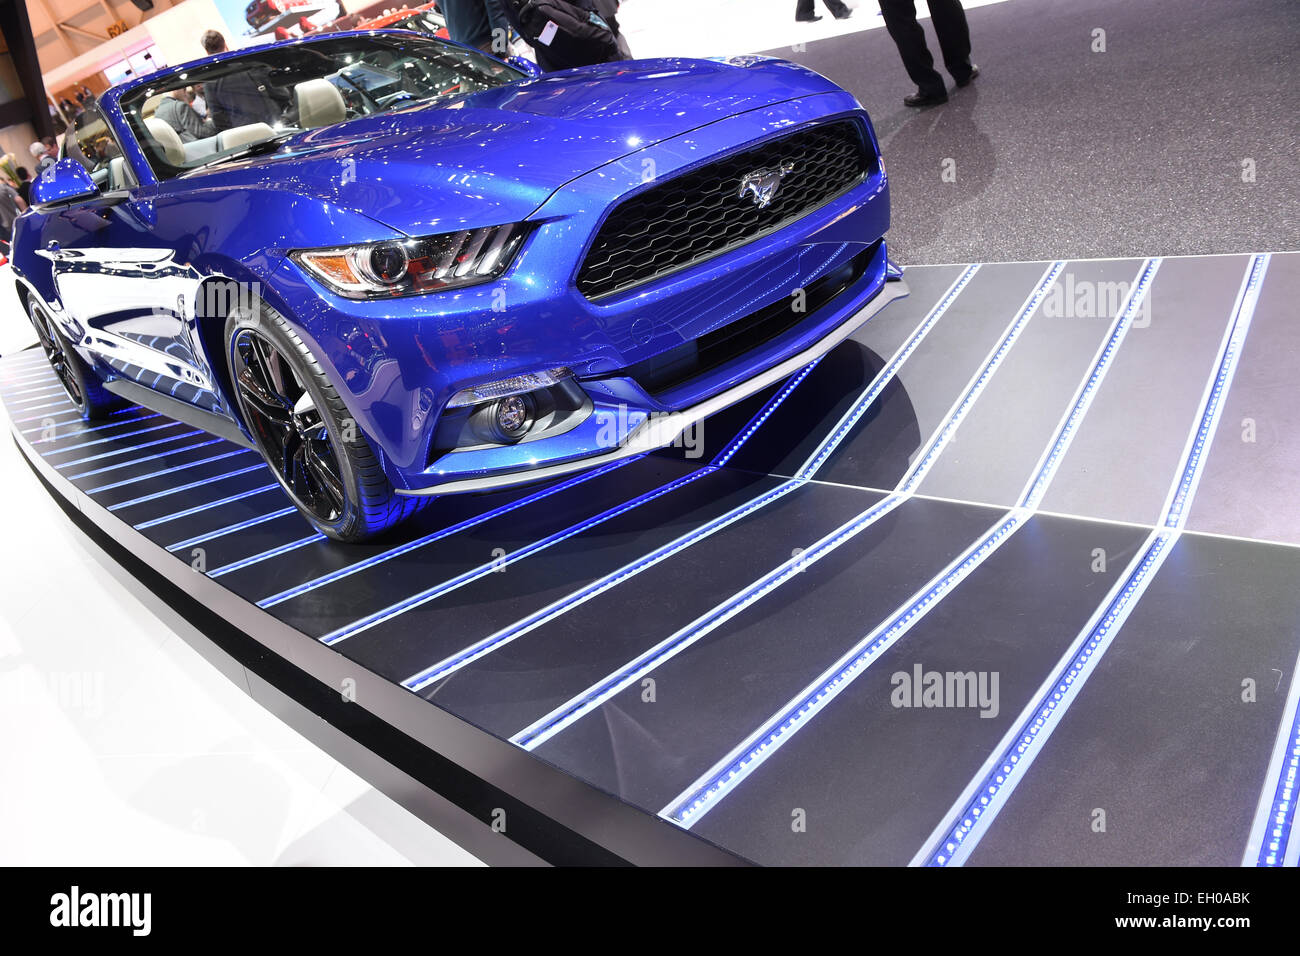 Geneva, Switzerland. 4th Mar, 2015. Car manufacturer Ford is displaying a  Ford Mustang Convertible at the Palexpo fairground a day prior to the  official opening of the 85th Geneva International Motor Show